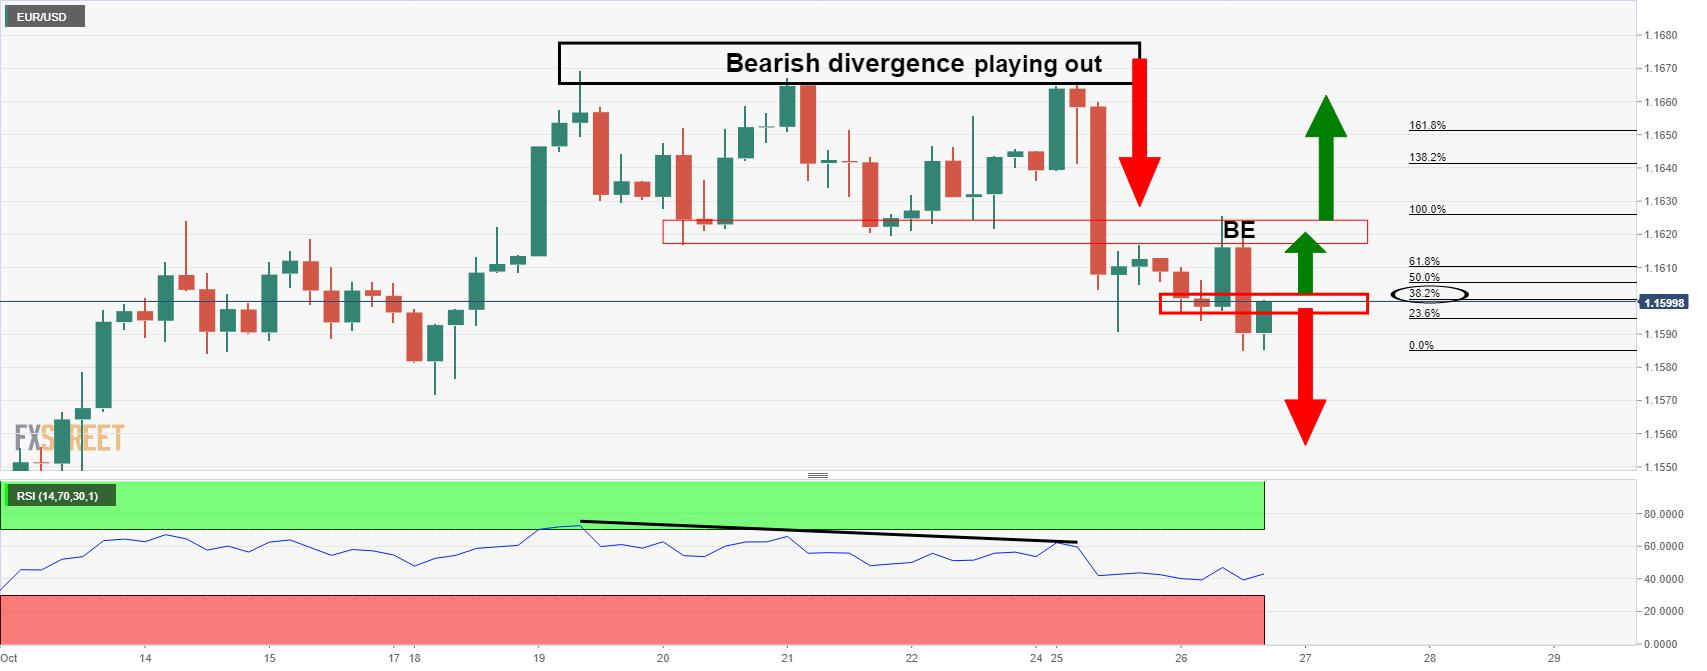 EUR/USD Price Analysis: A mixed technical picture leaning with slight bearish bias